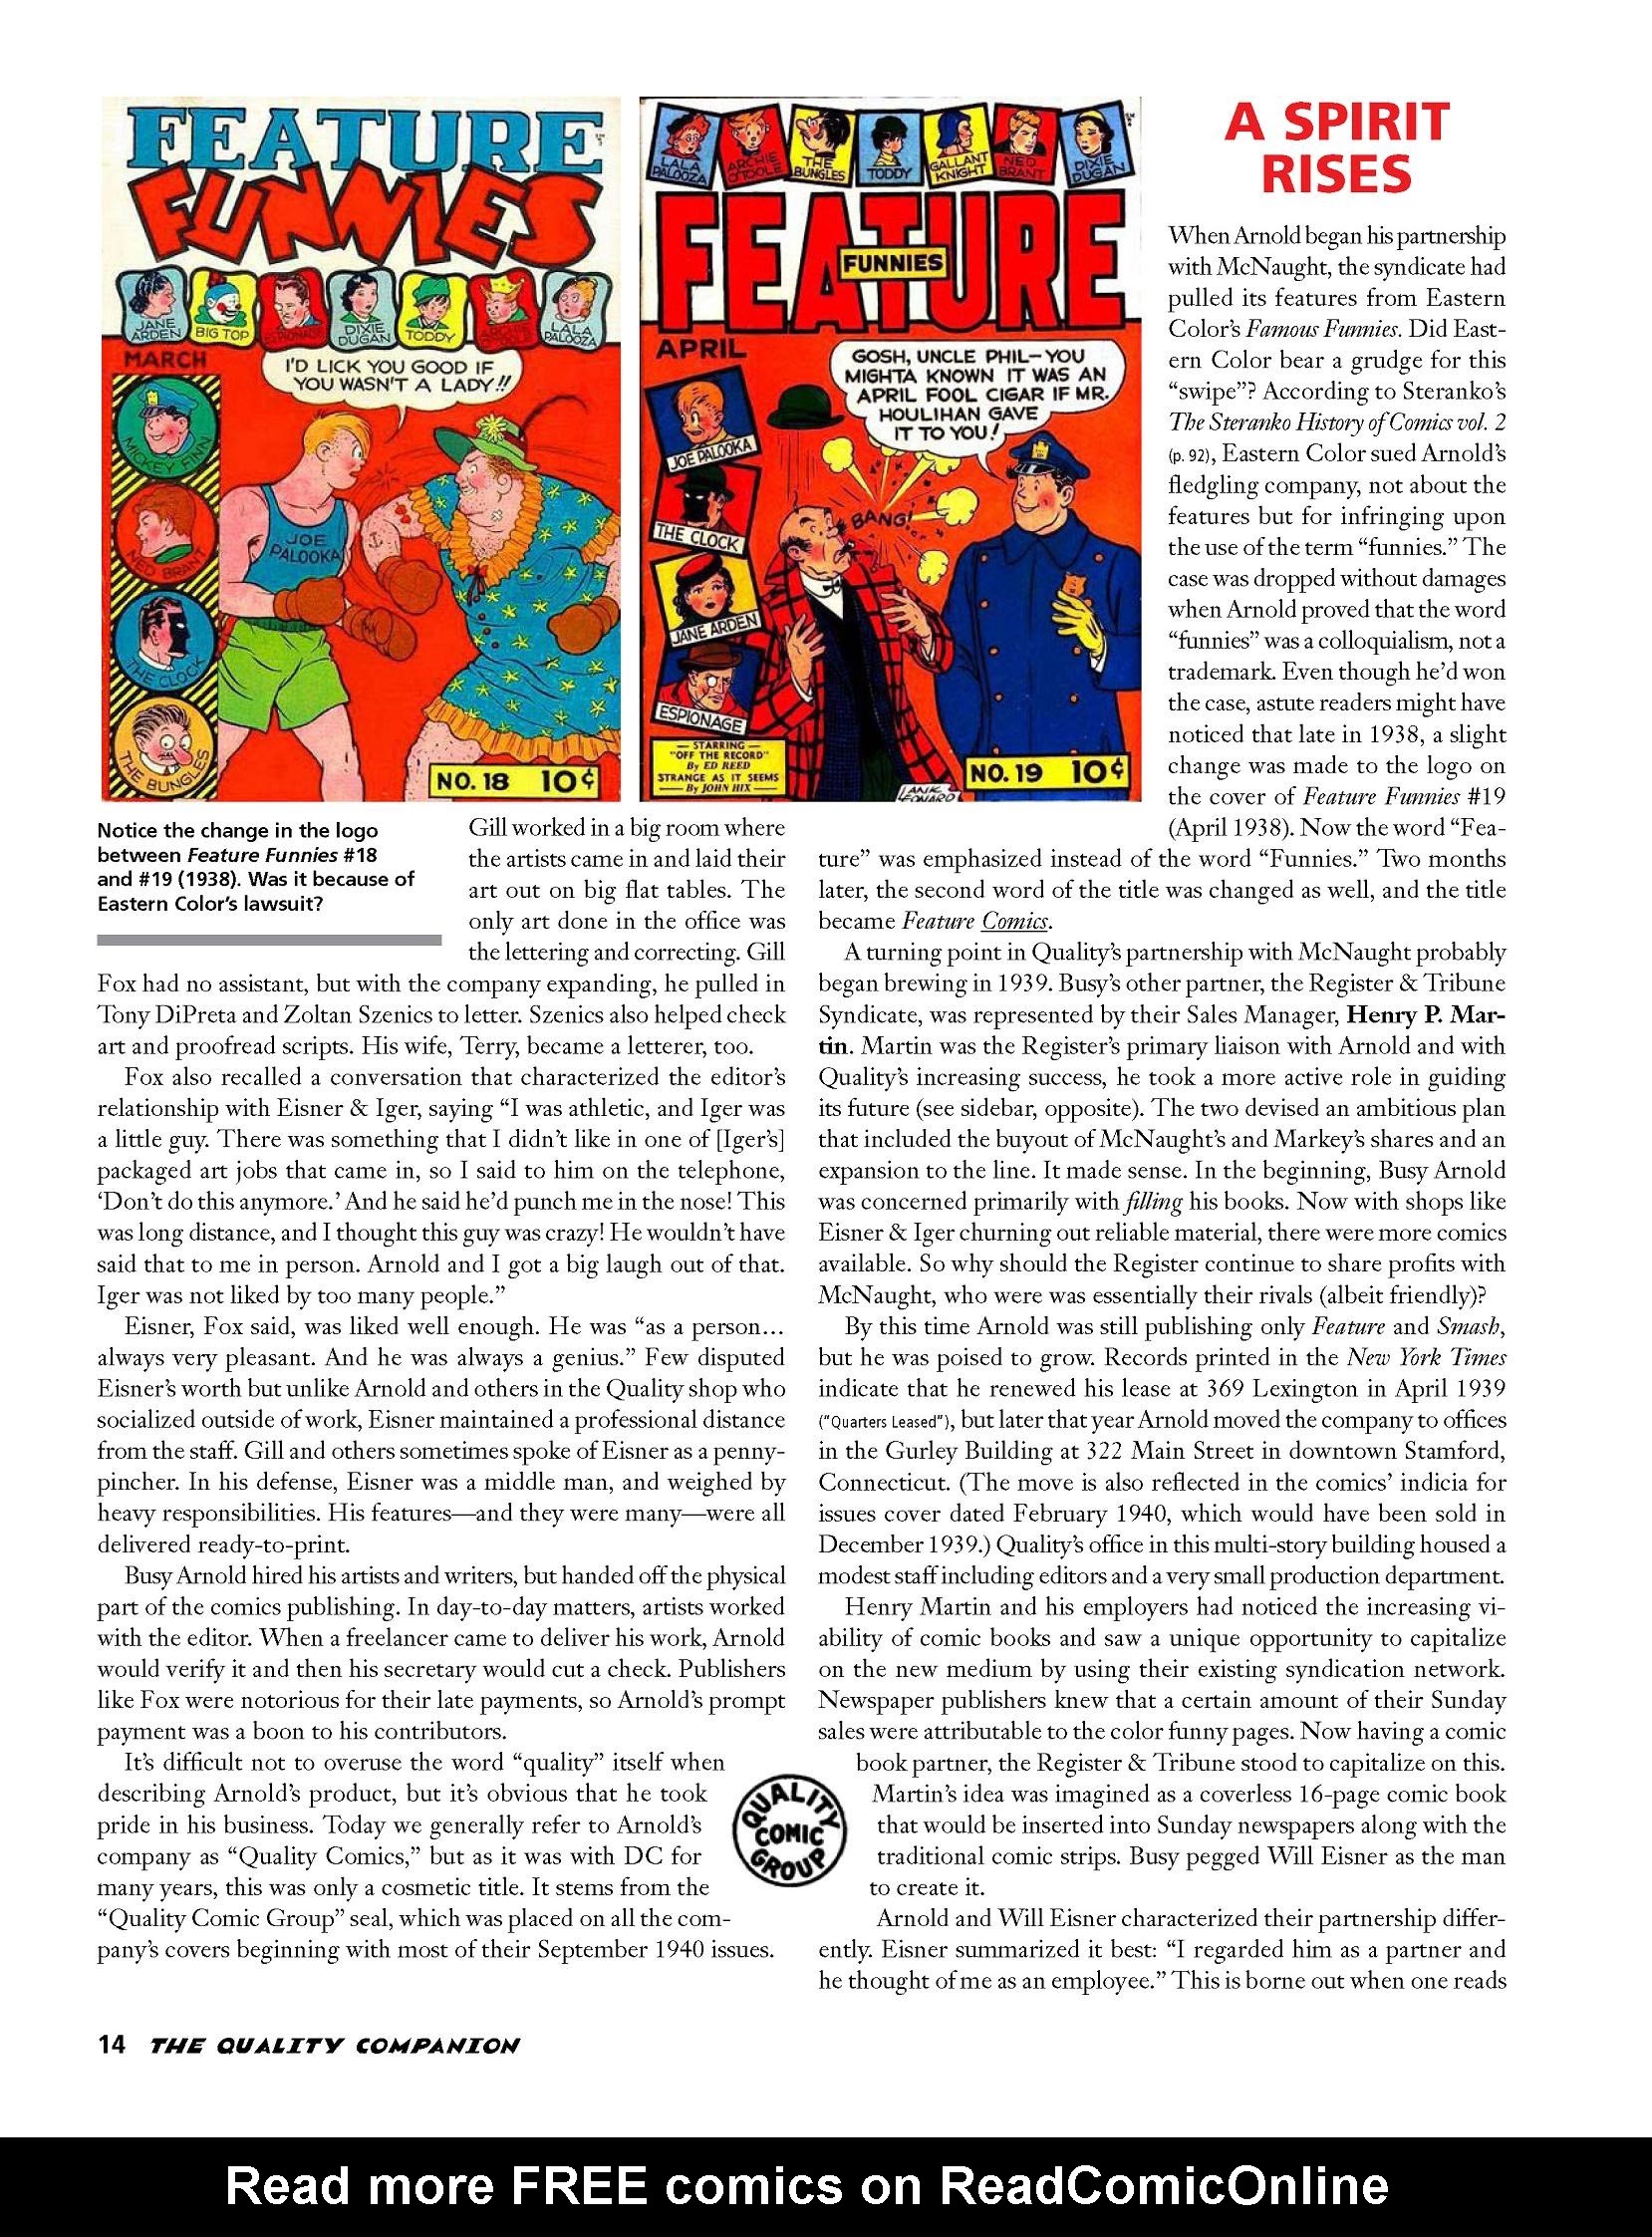 Read online The Quality Companion comic -  Issue # TPB (Part 1) - 80